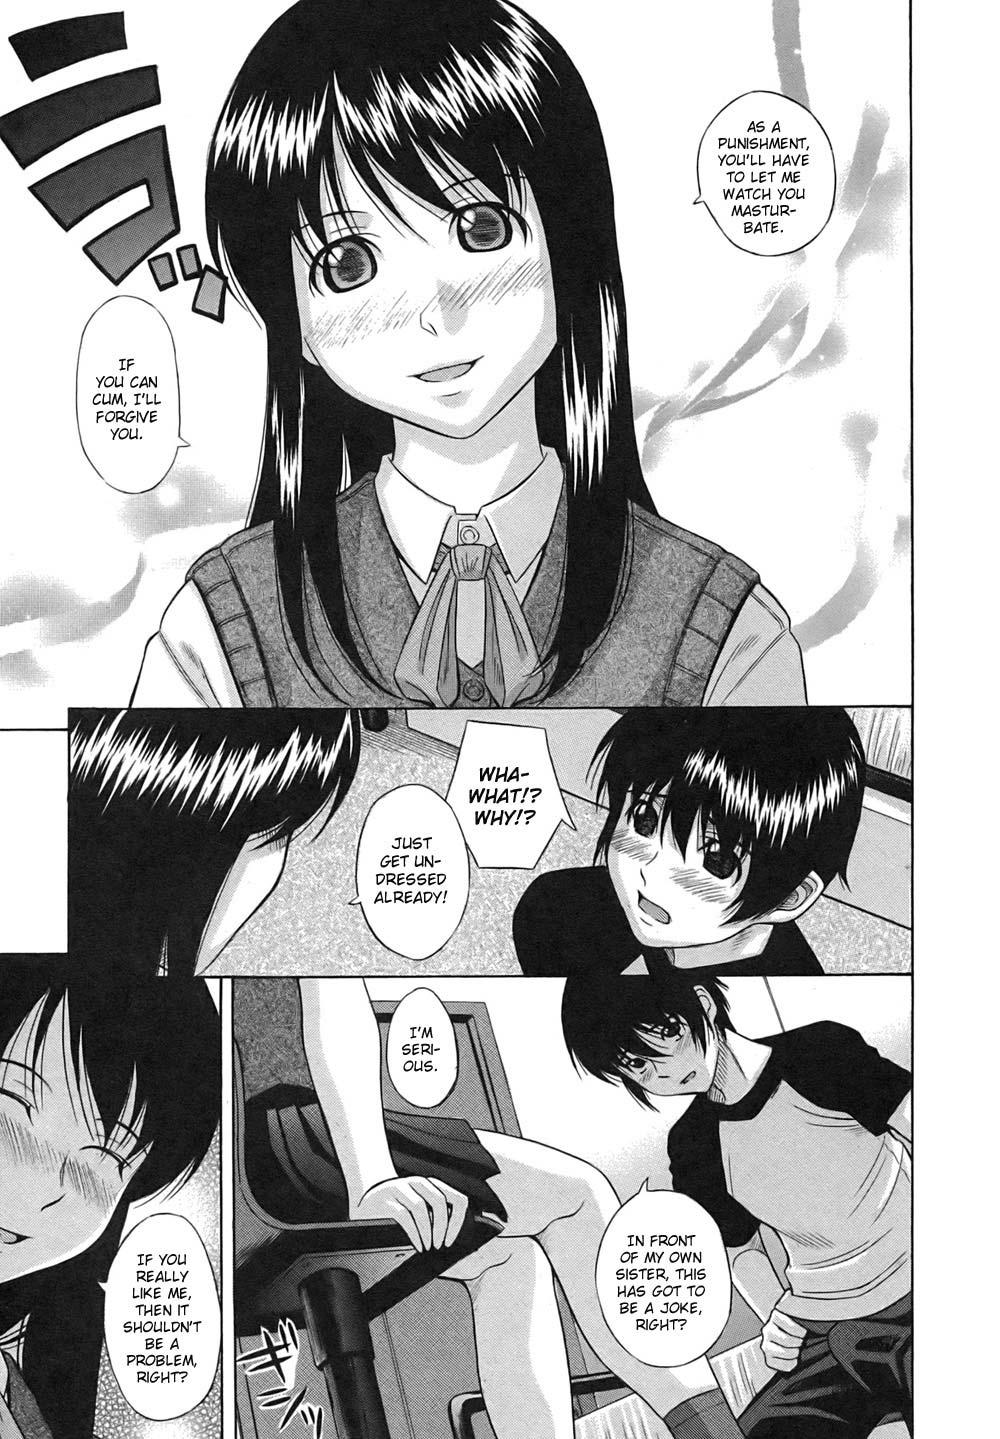 Jerking Off The Scent Of My Sister - Hashida Mamoru Home - Page 5